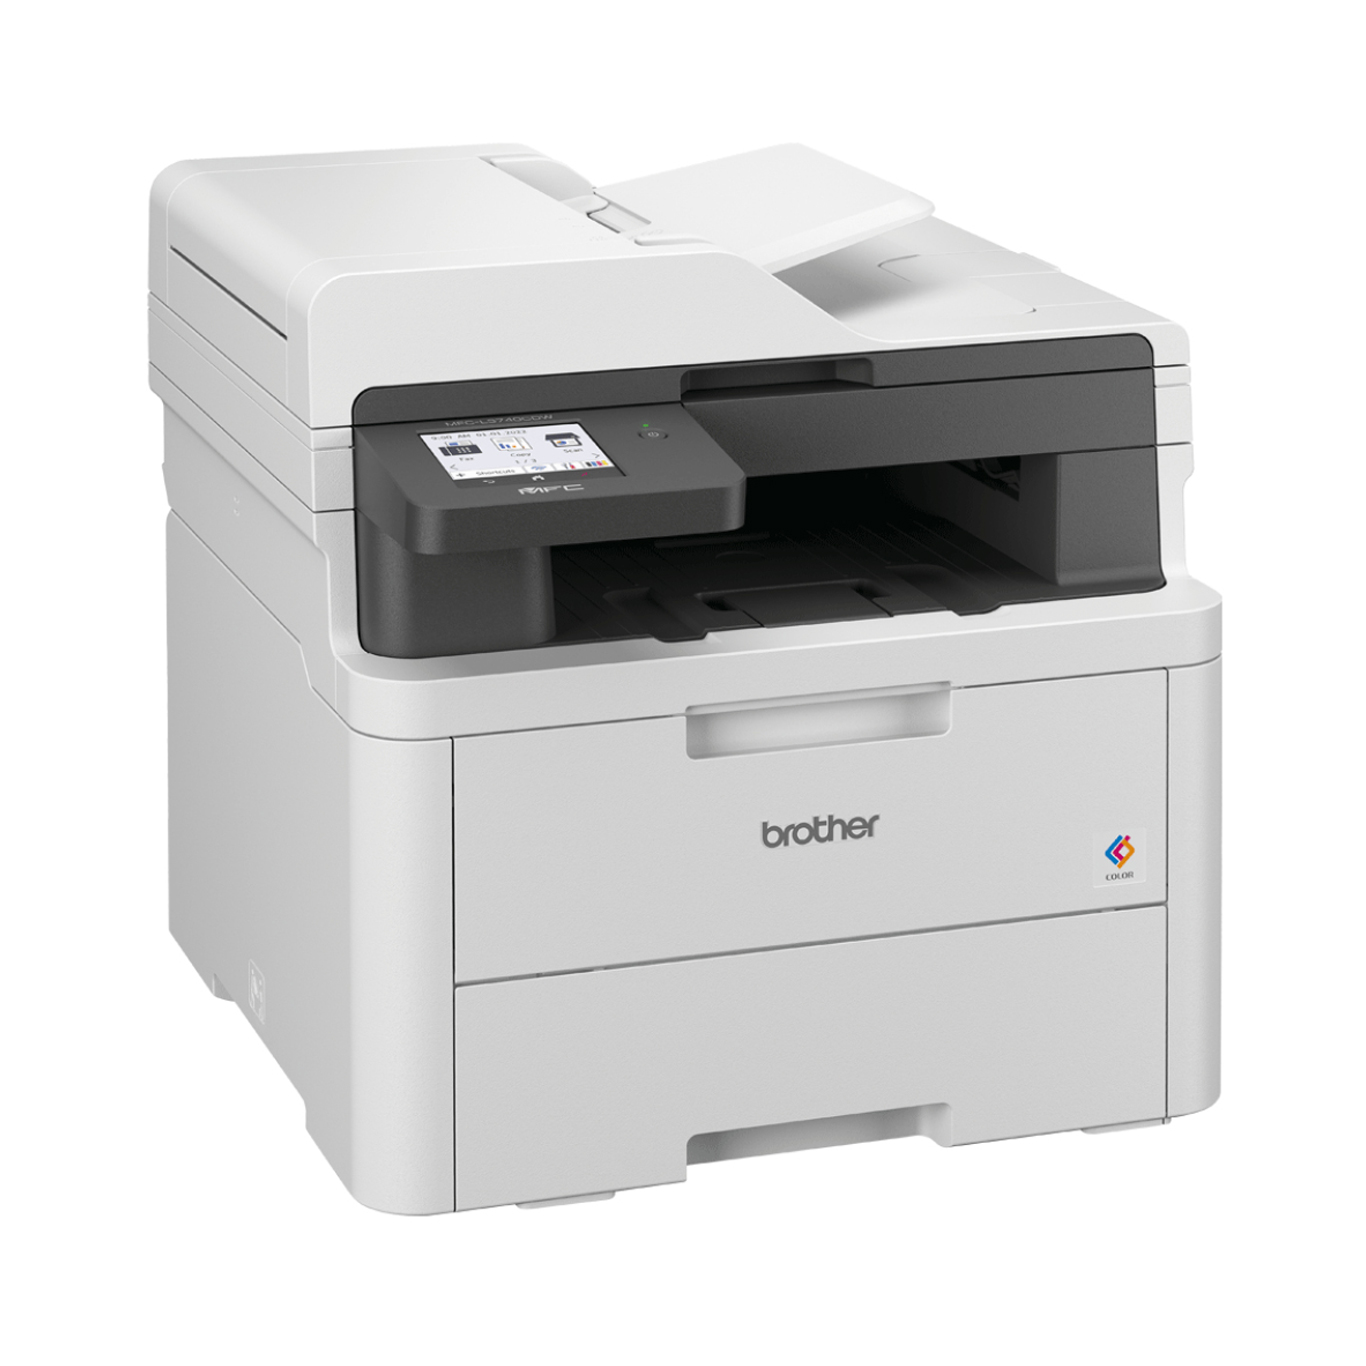 Brother DCPL3550CDW All-in-One Wireless Laser Printer